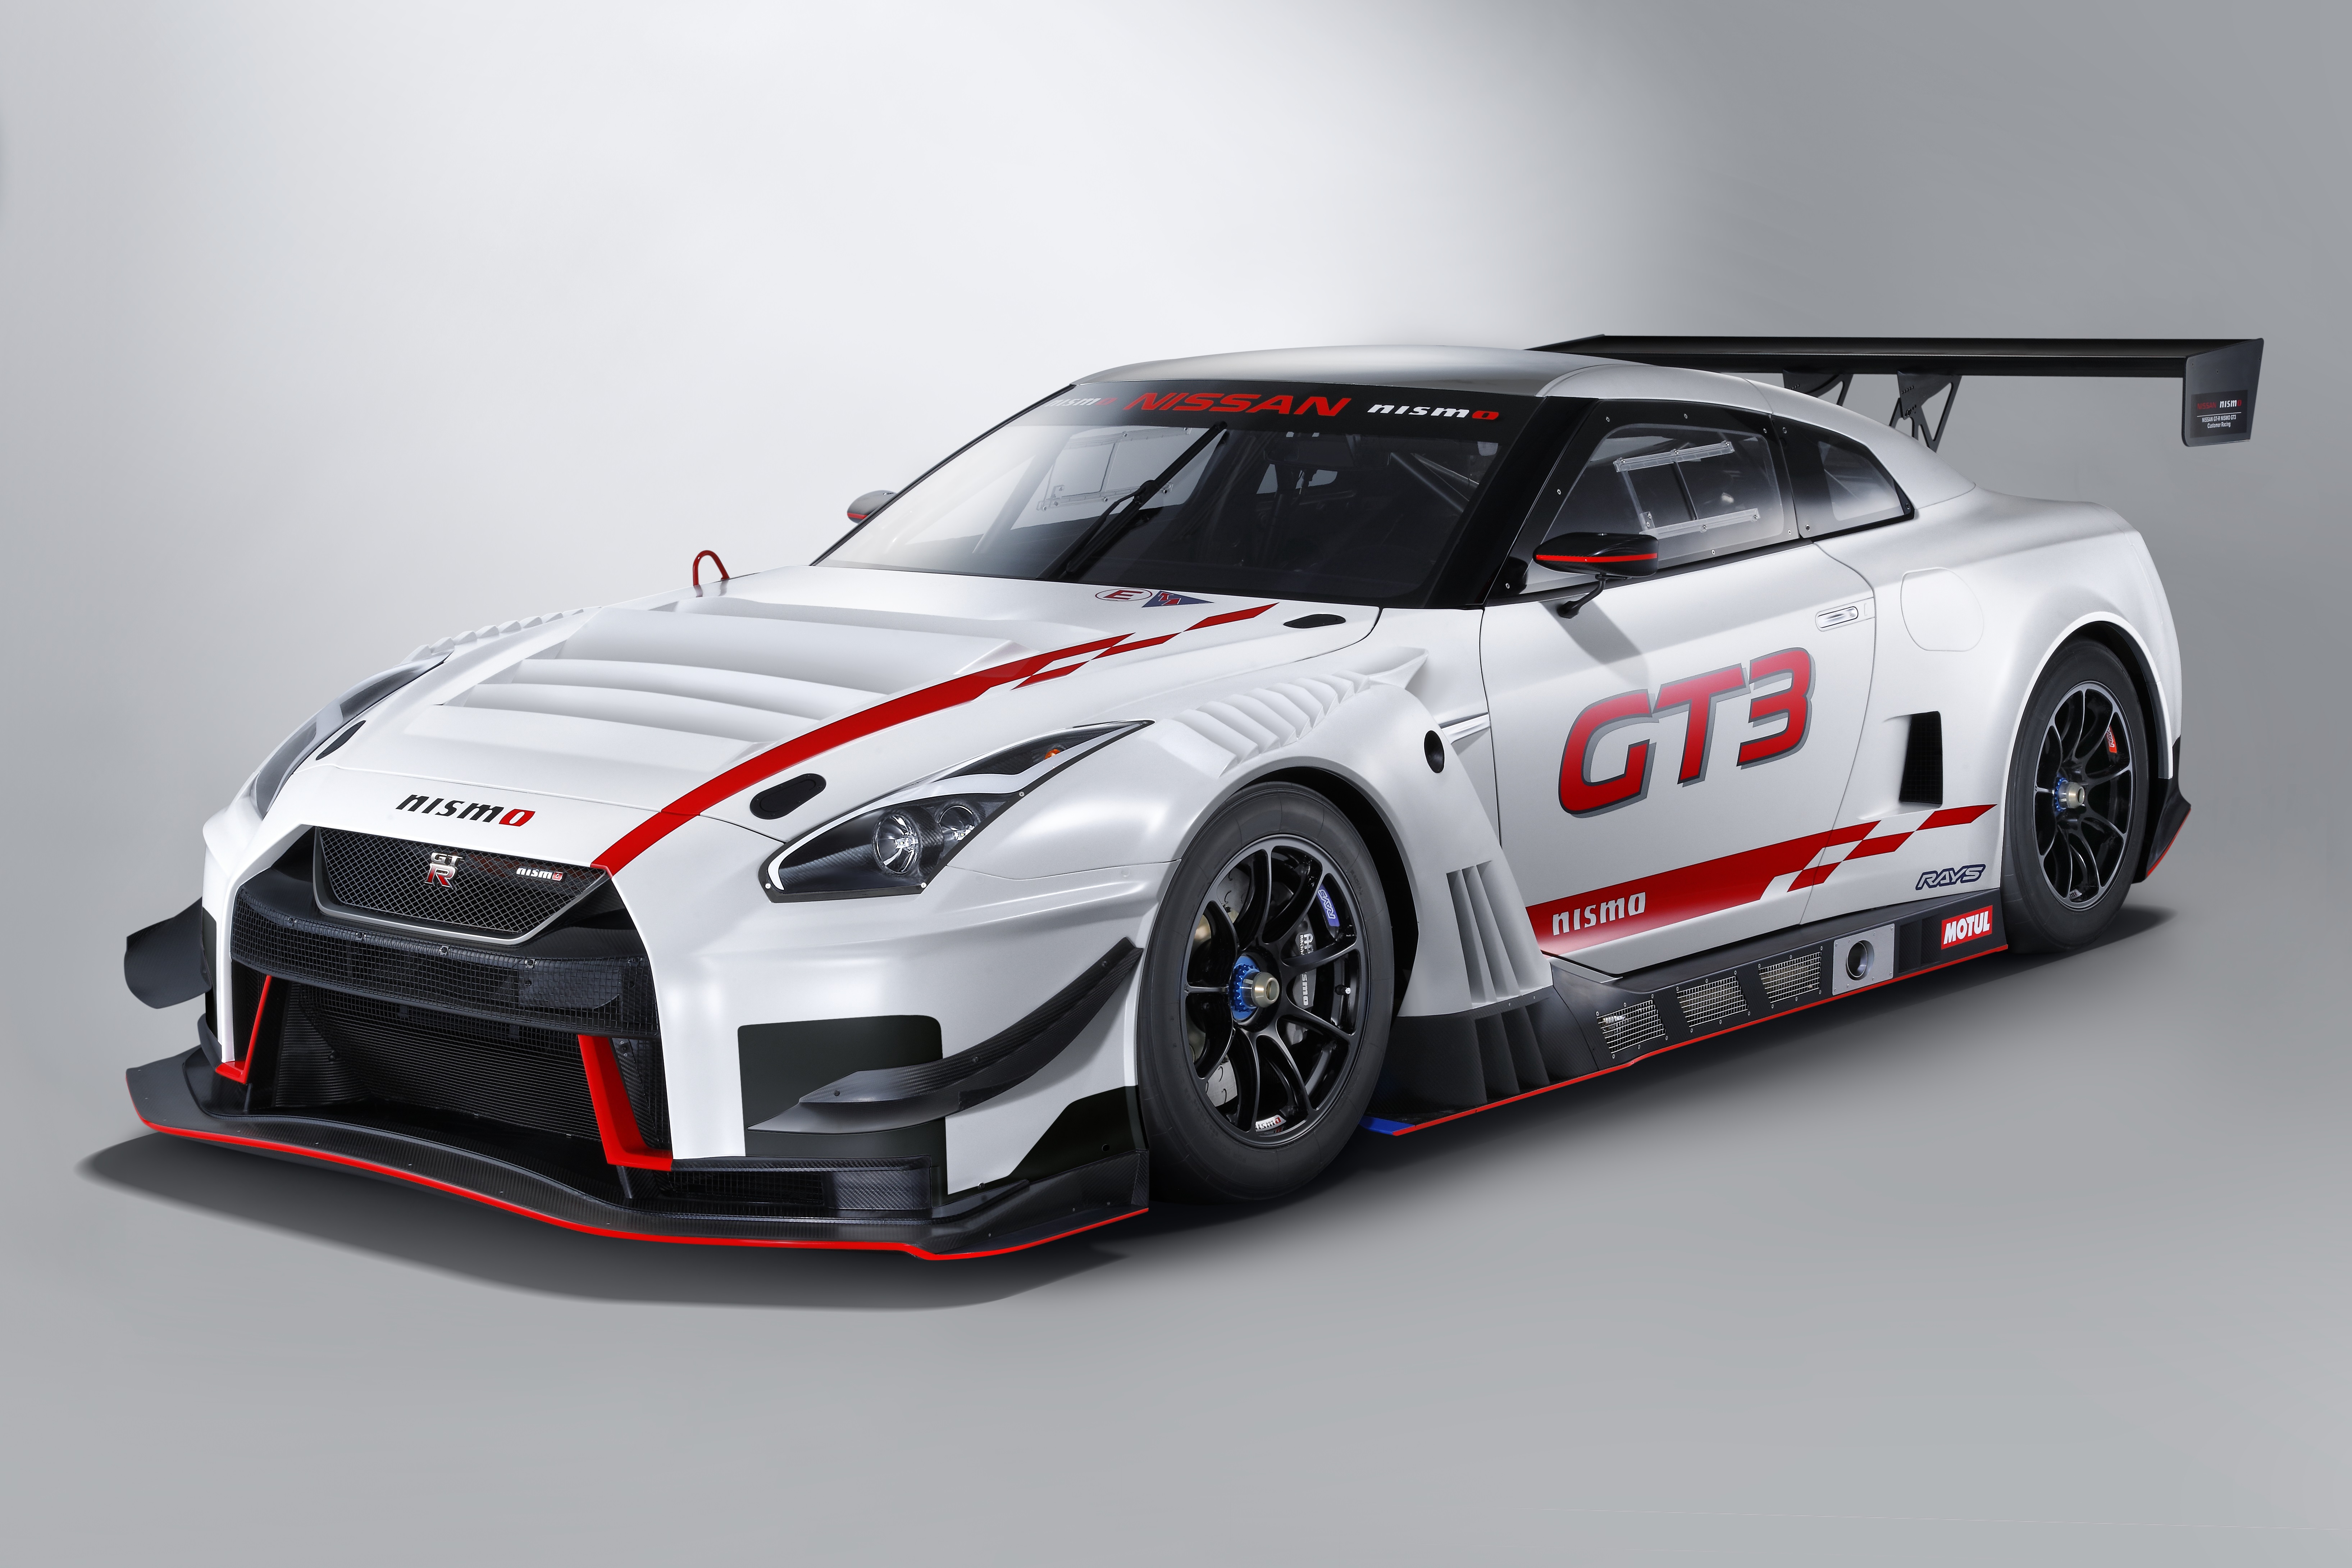 2018 Nissan Gt-R Nismo Gt3 - Now Air-Conditioned - Paultan.Org